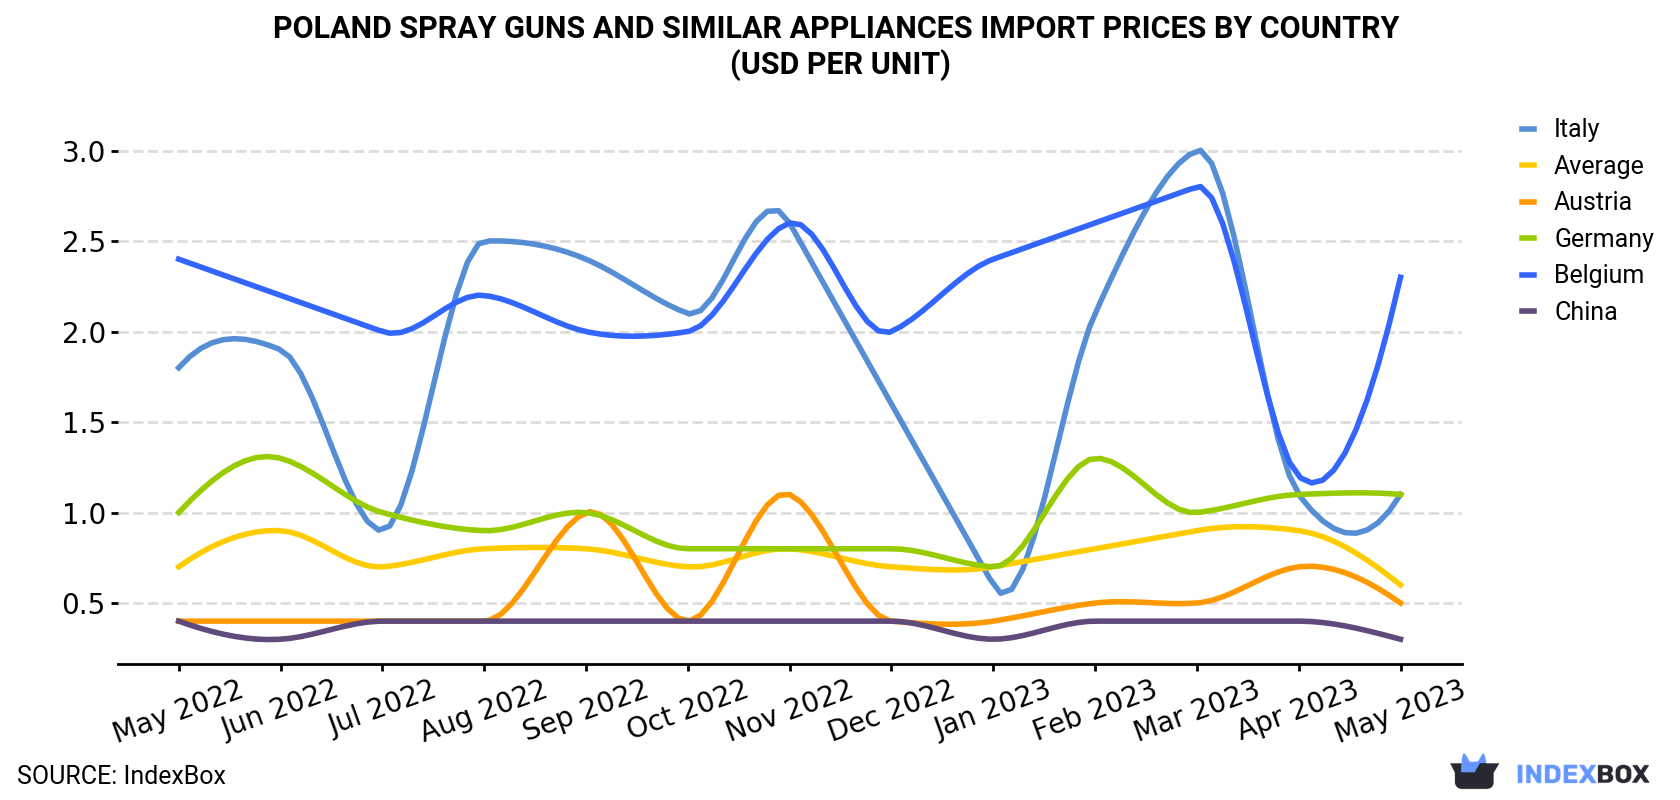 Poland Spray Guns And Similar Appliances Import Prices By Country (USD Per Unit)